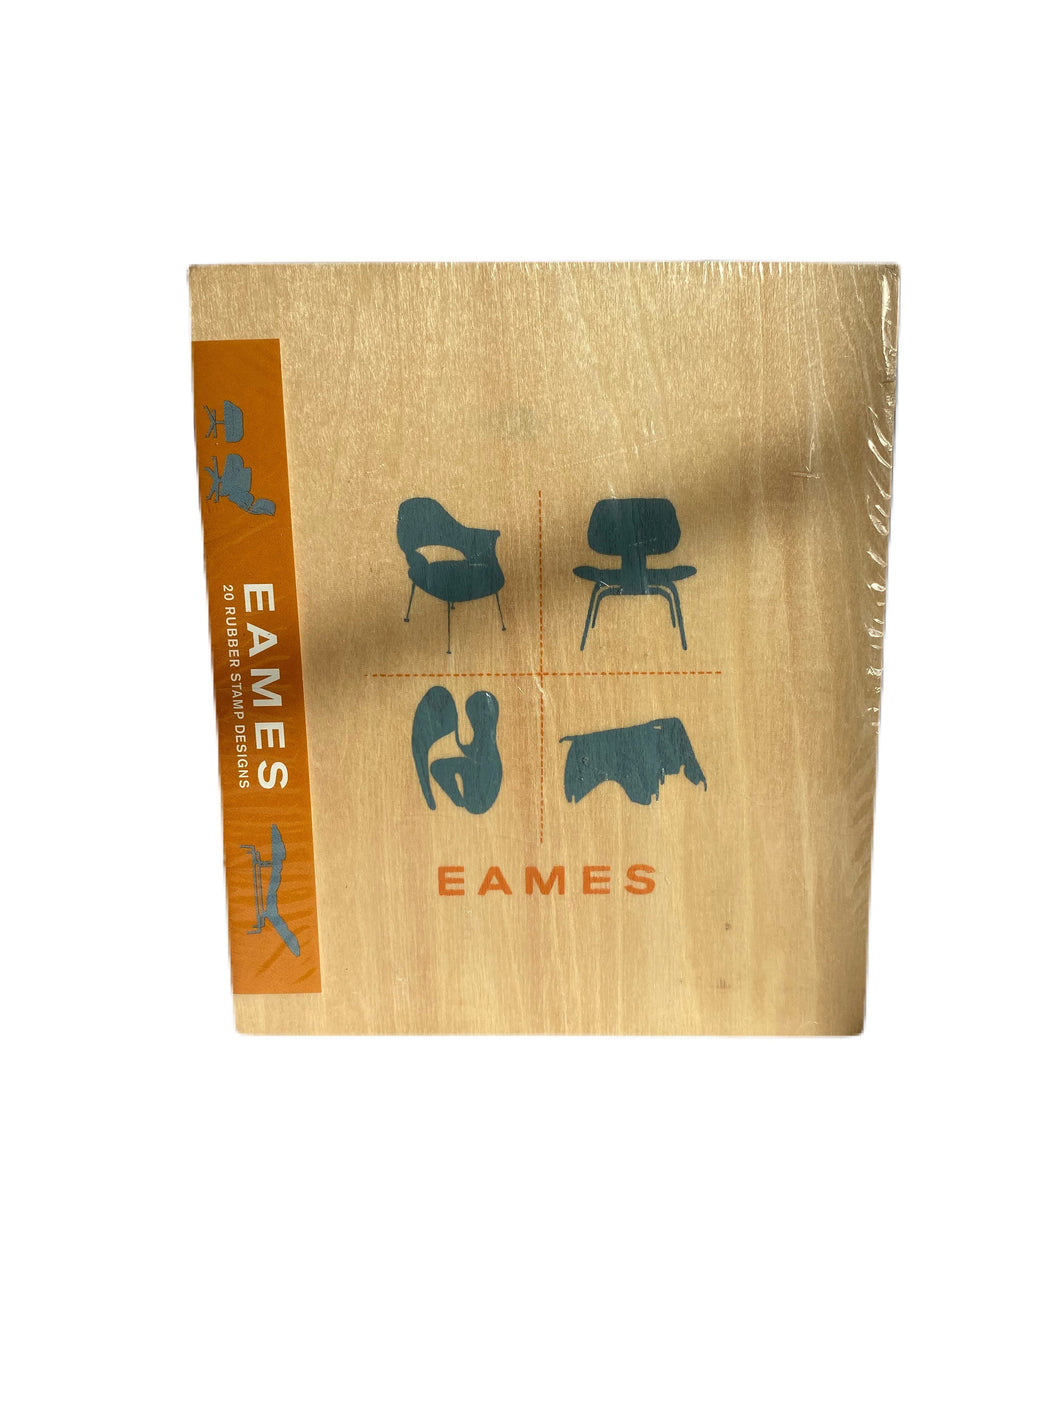 Rare Eames Rubber Stamp Kit